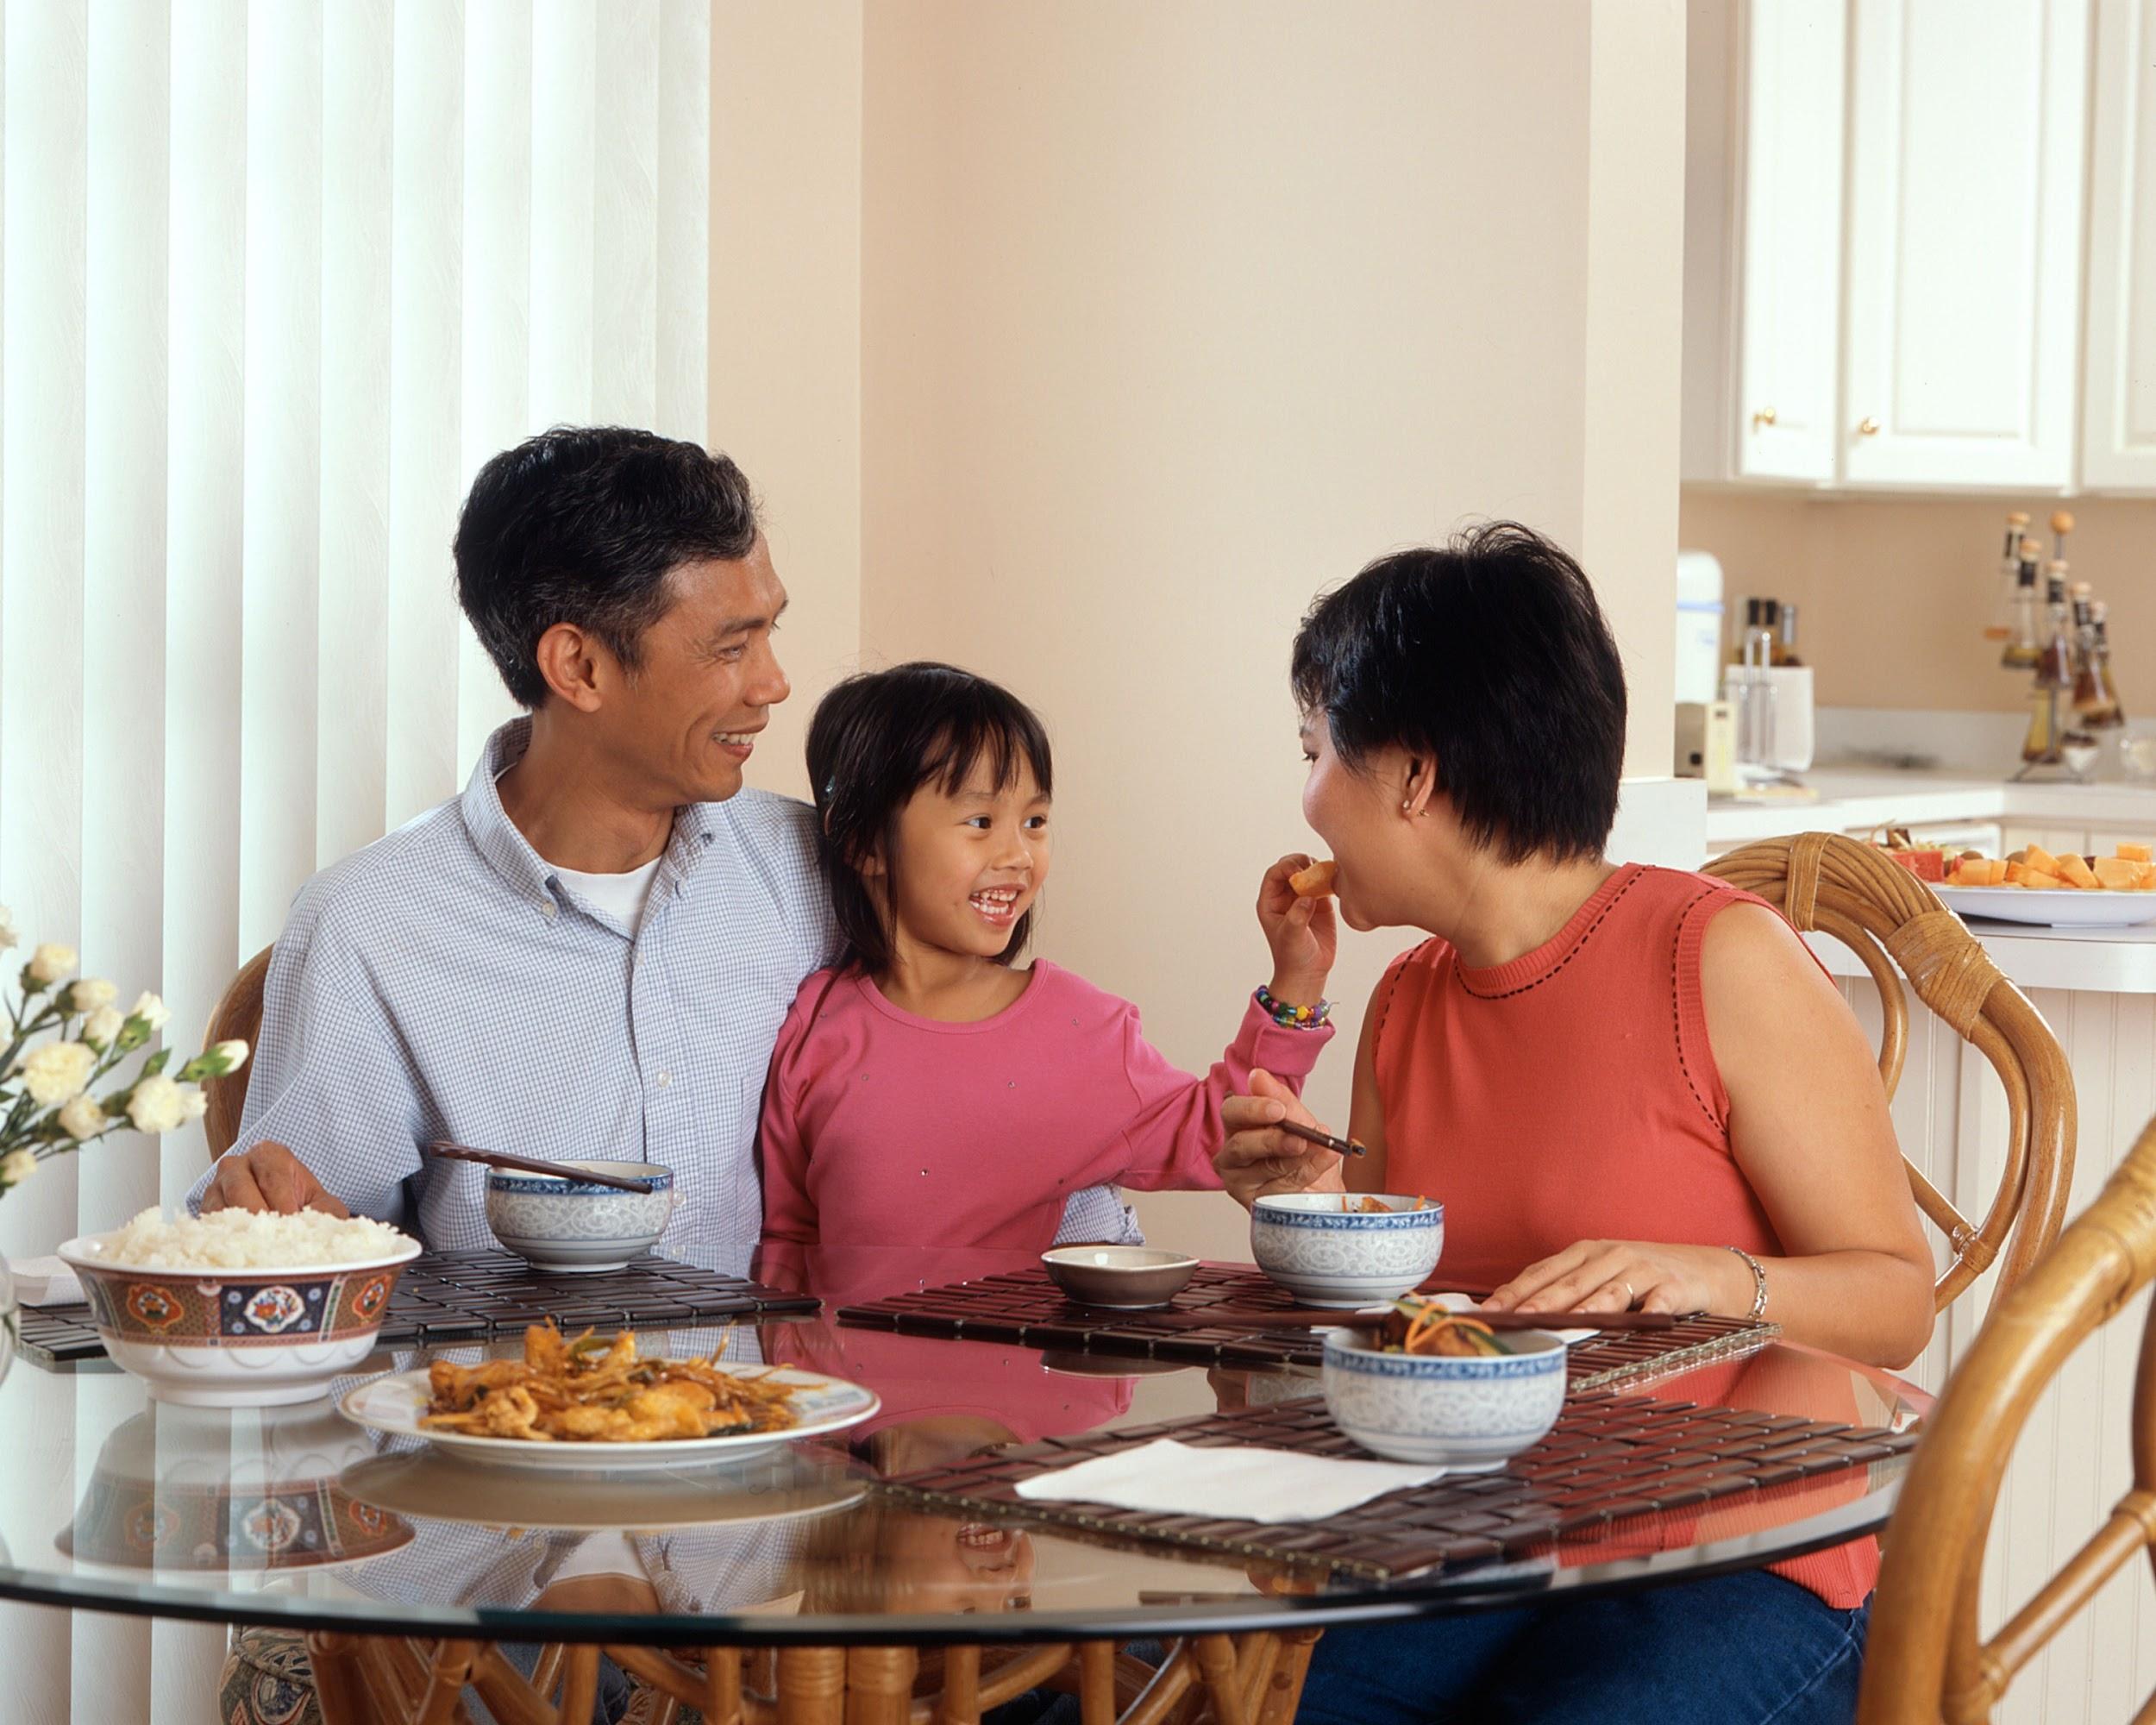 A family of three (mom, dad and daughter) sitting at a glass round table, enjoying a meal of rice and chicken. The young child is feeding the mom a bite of food.